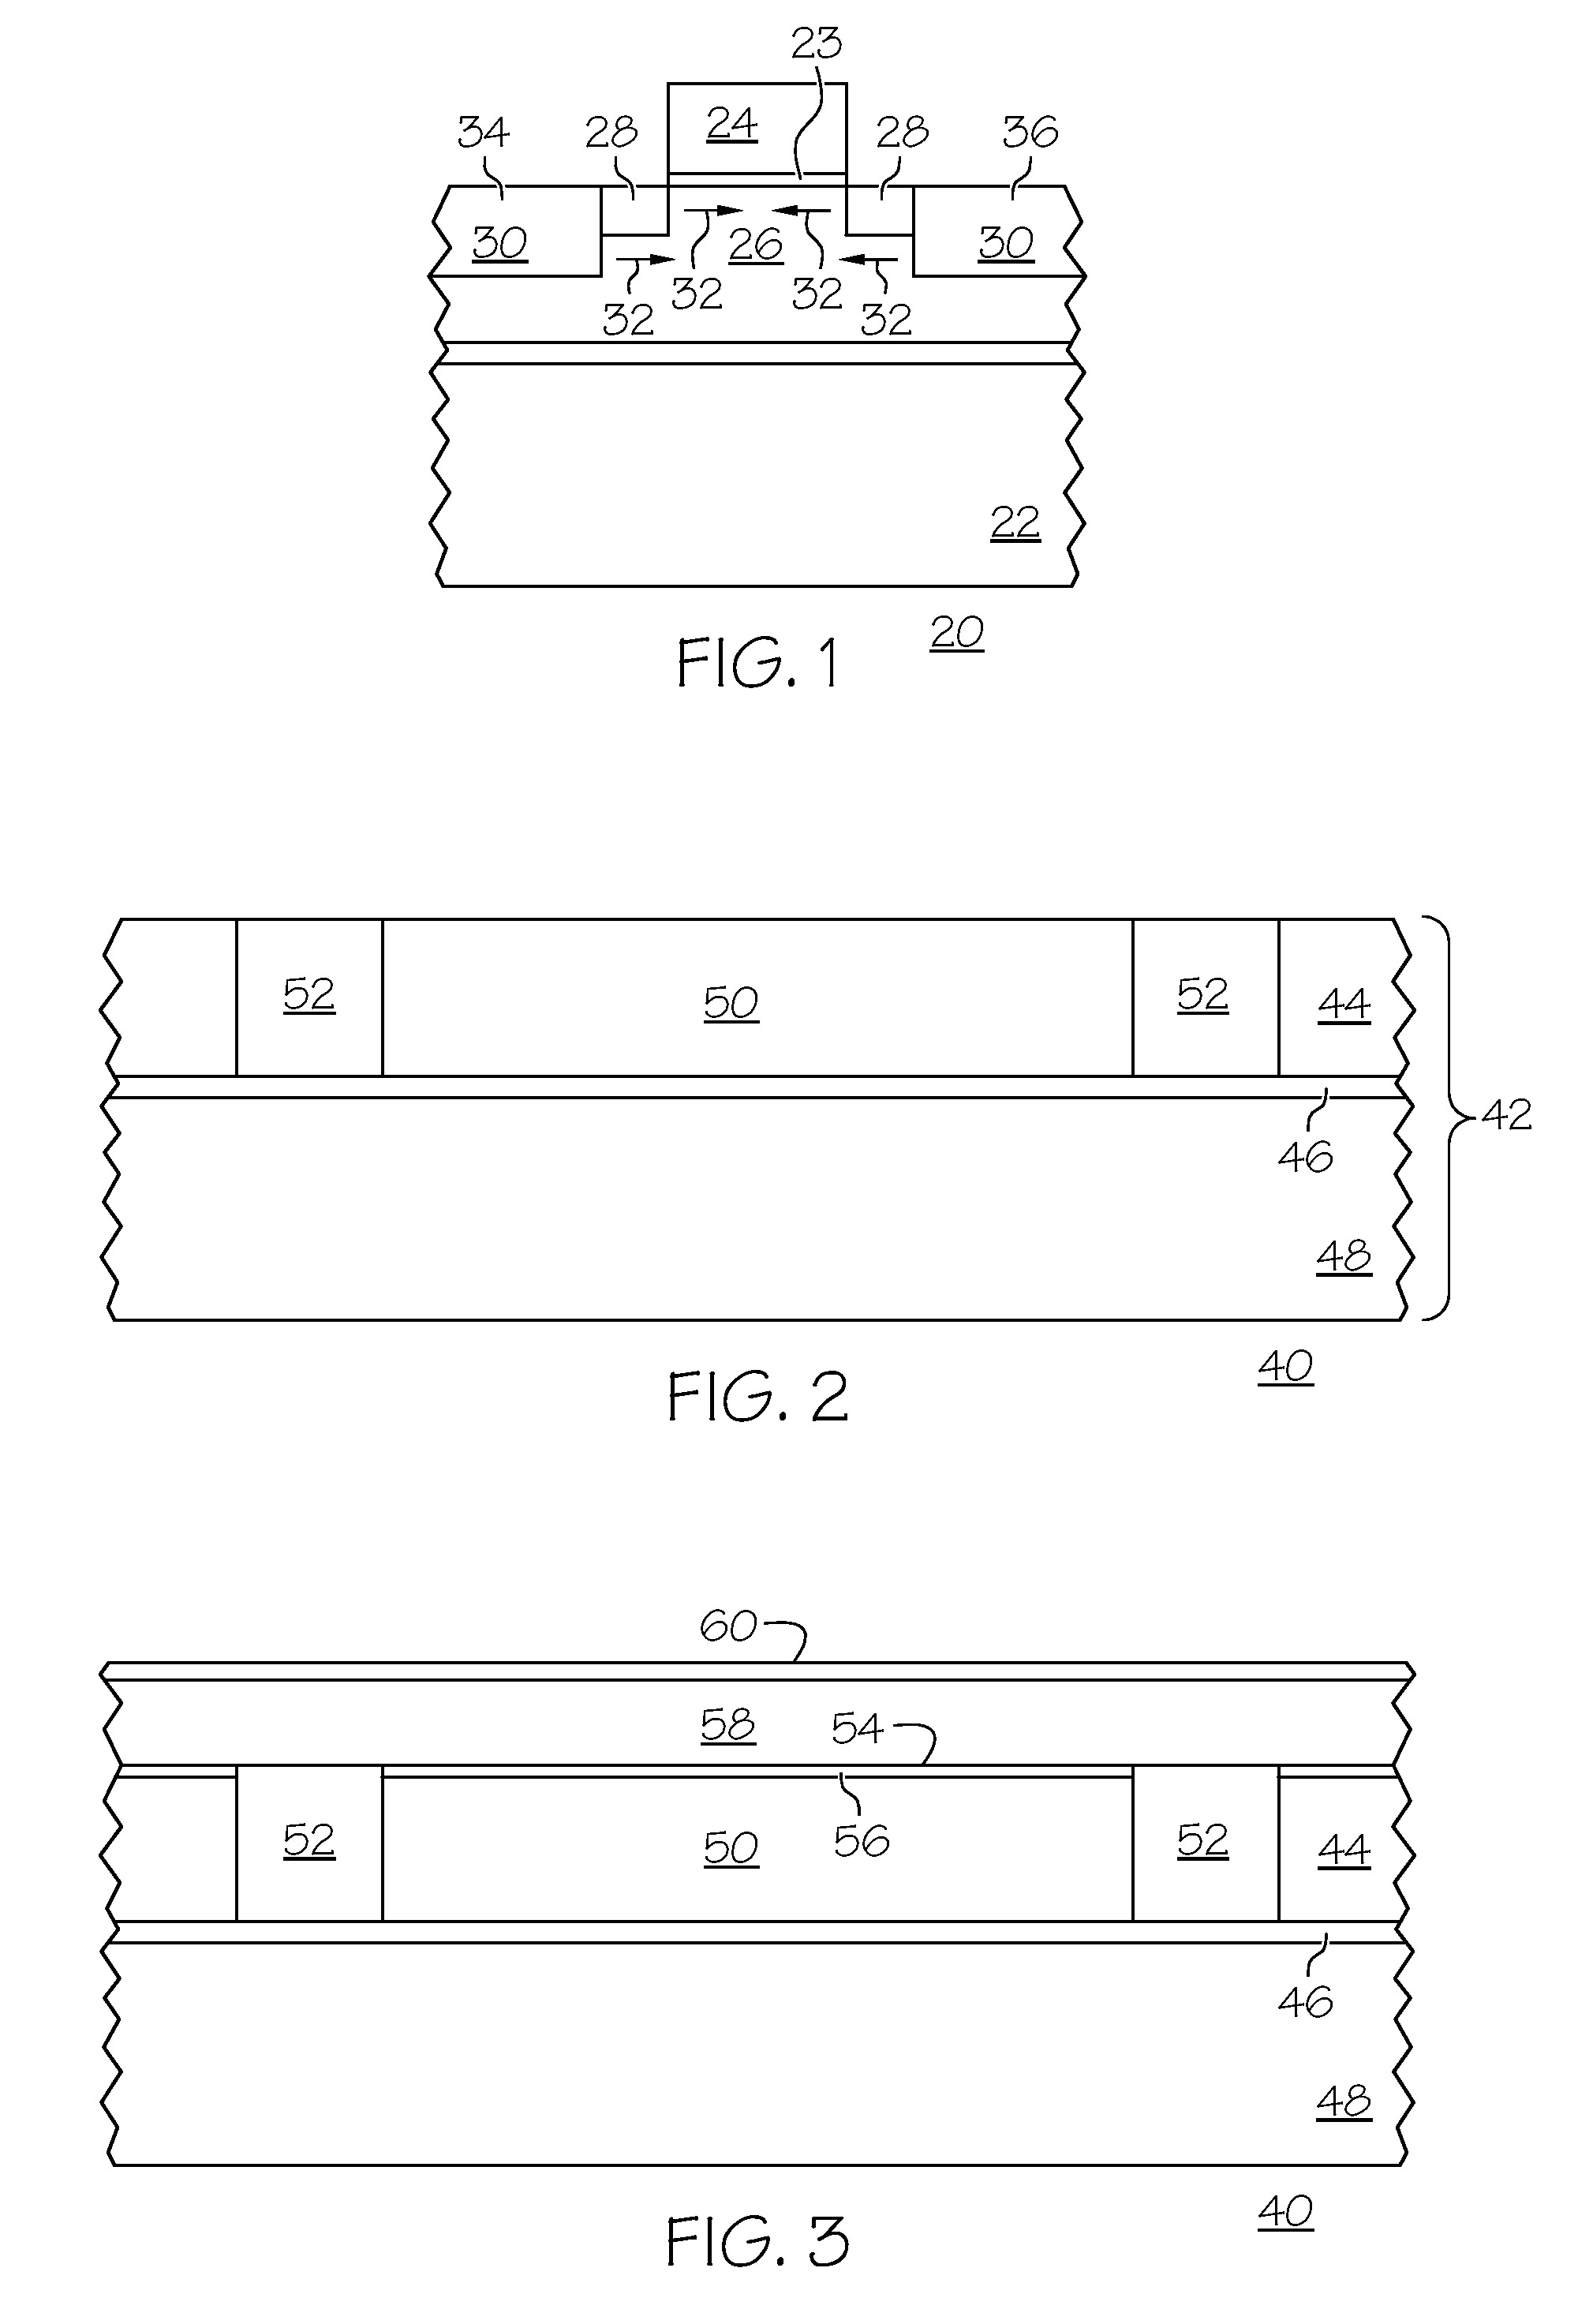 Stressed field effect transistor and methods for its fabrication